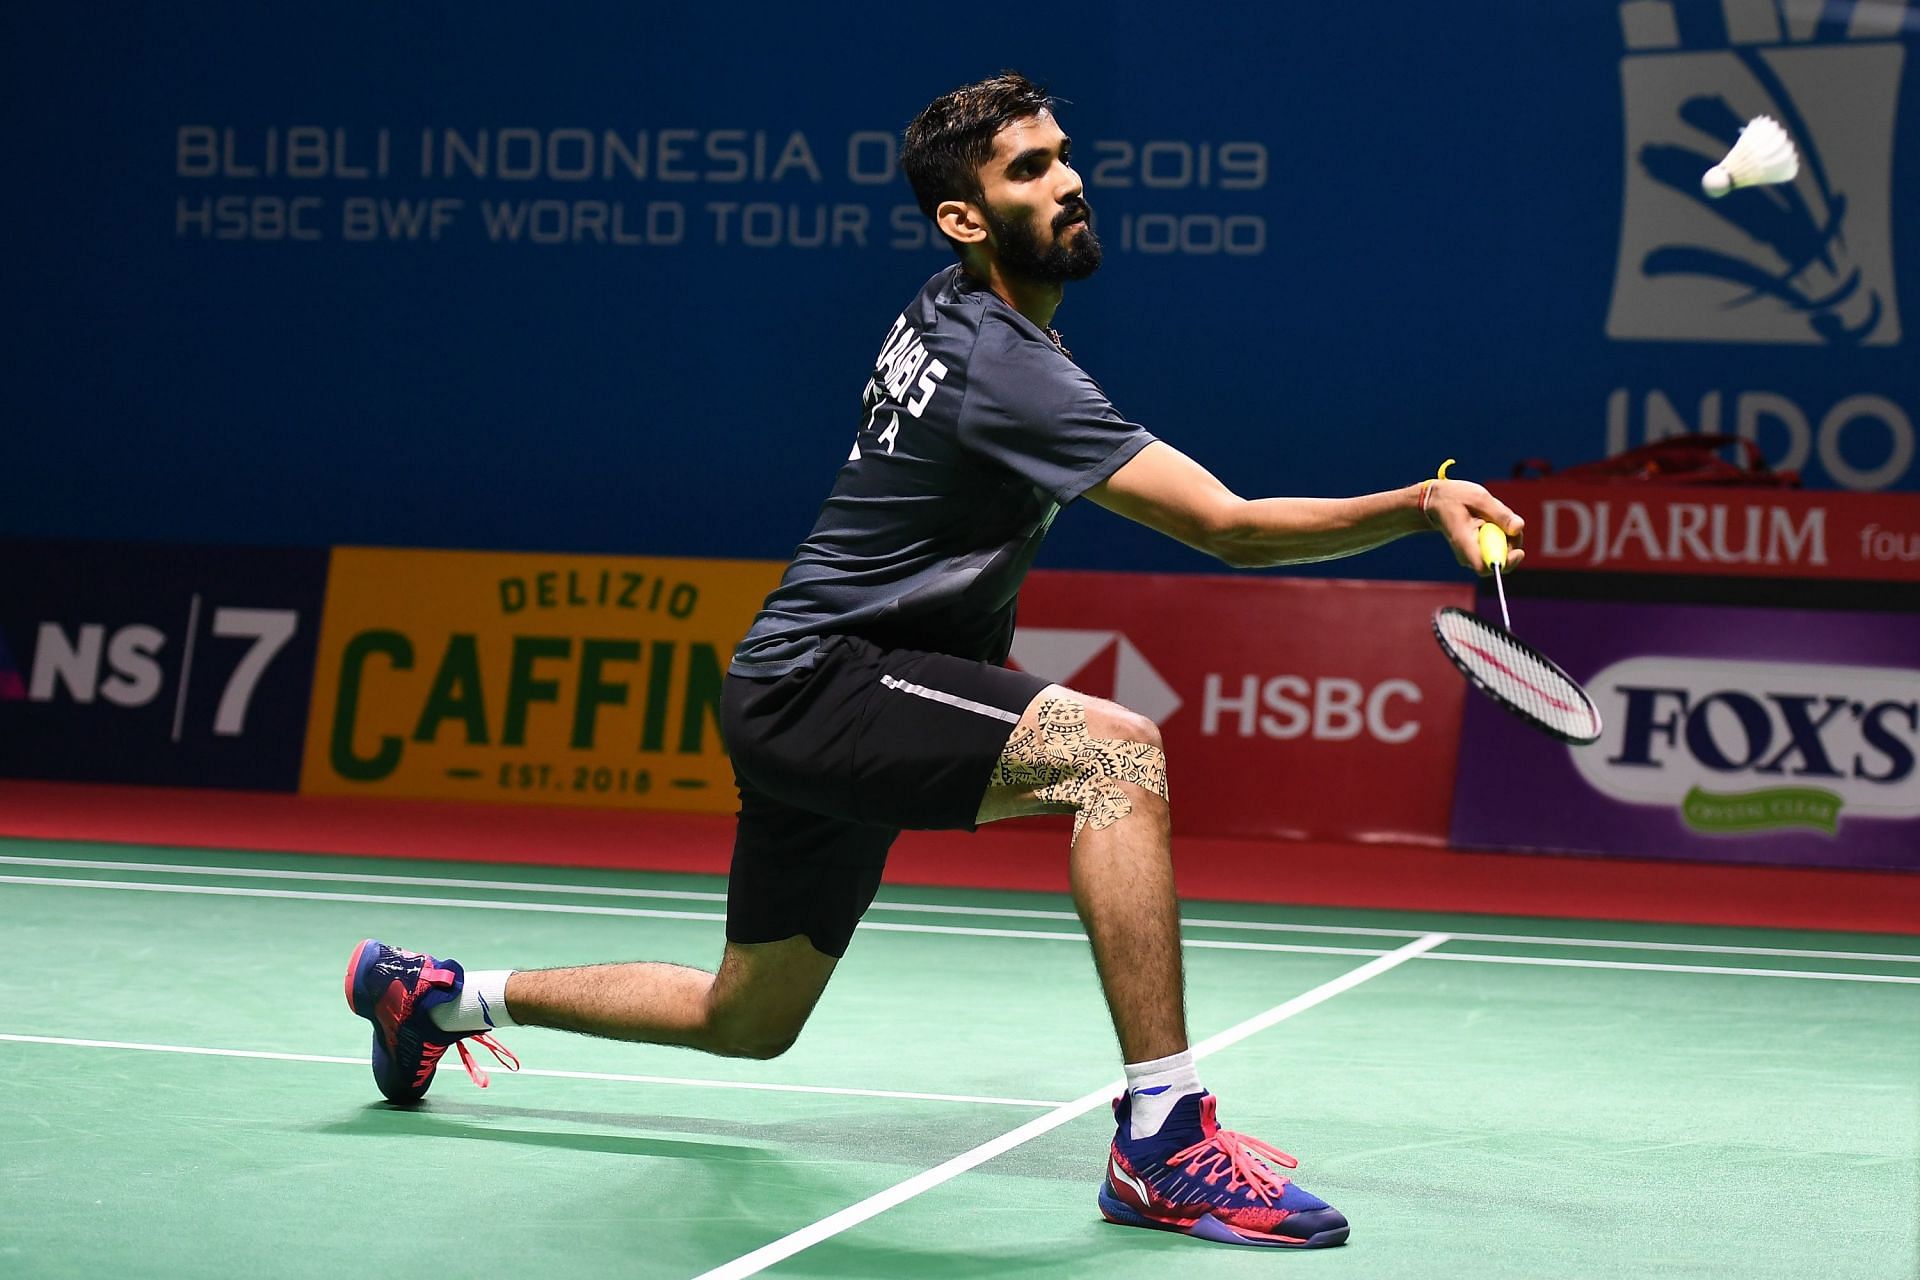 Srikanth in action at the Indonesia Open